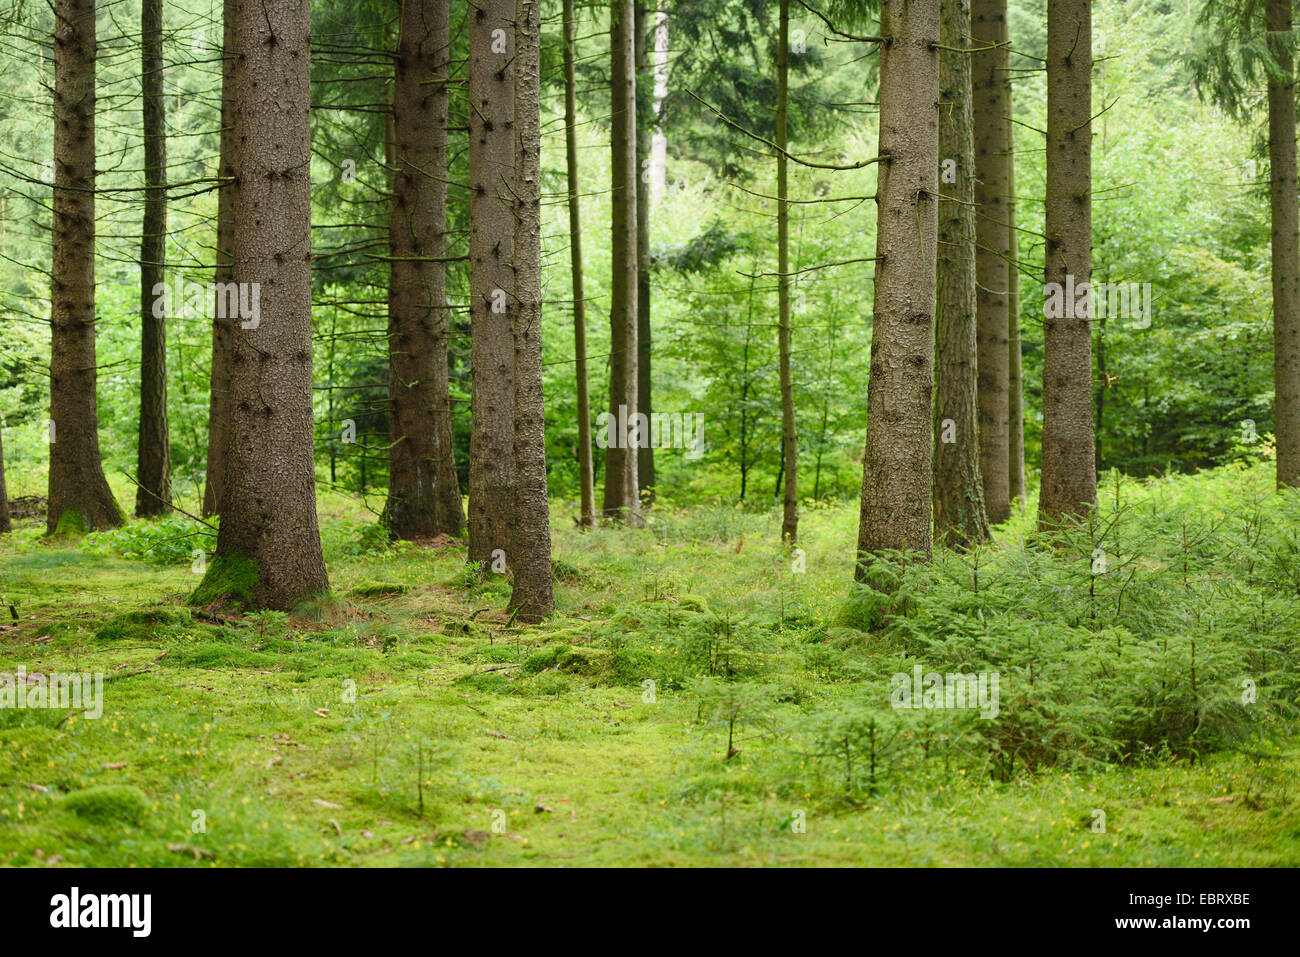 Norway spruce (Picea abies), spruce forest with young plants, Germany, Bavaria, Oberpfalz Stock Photo